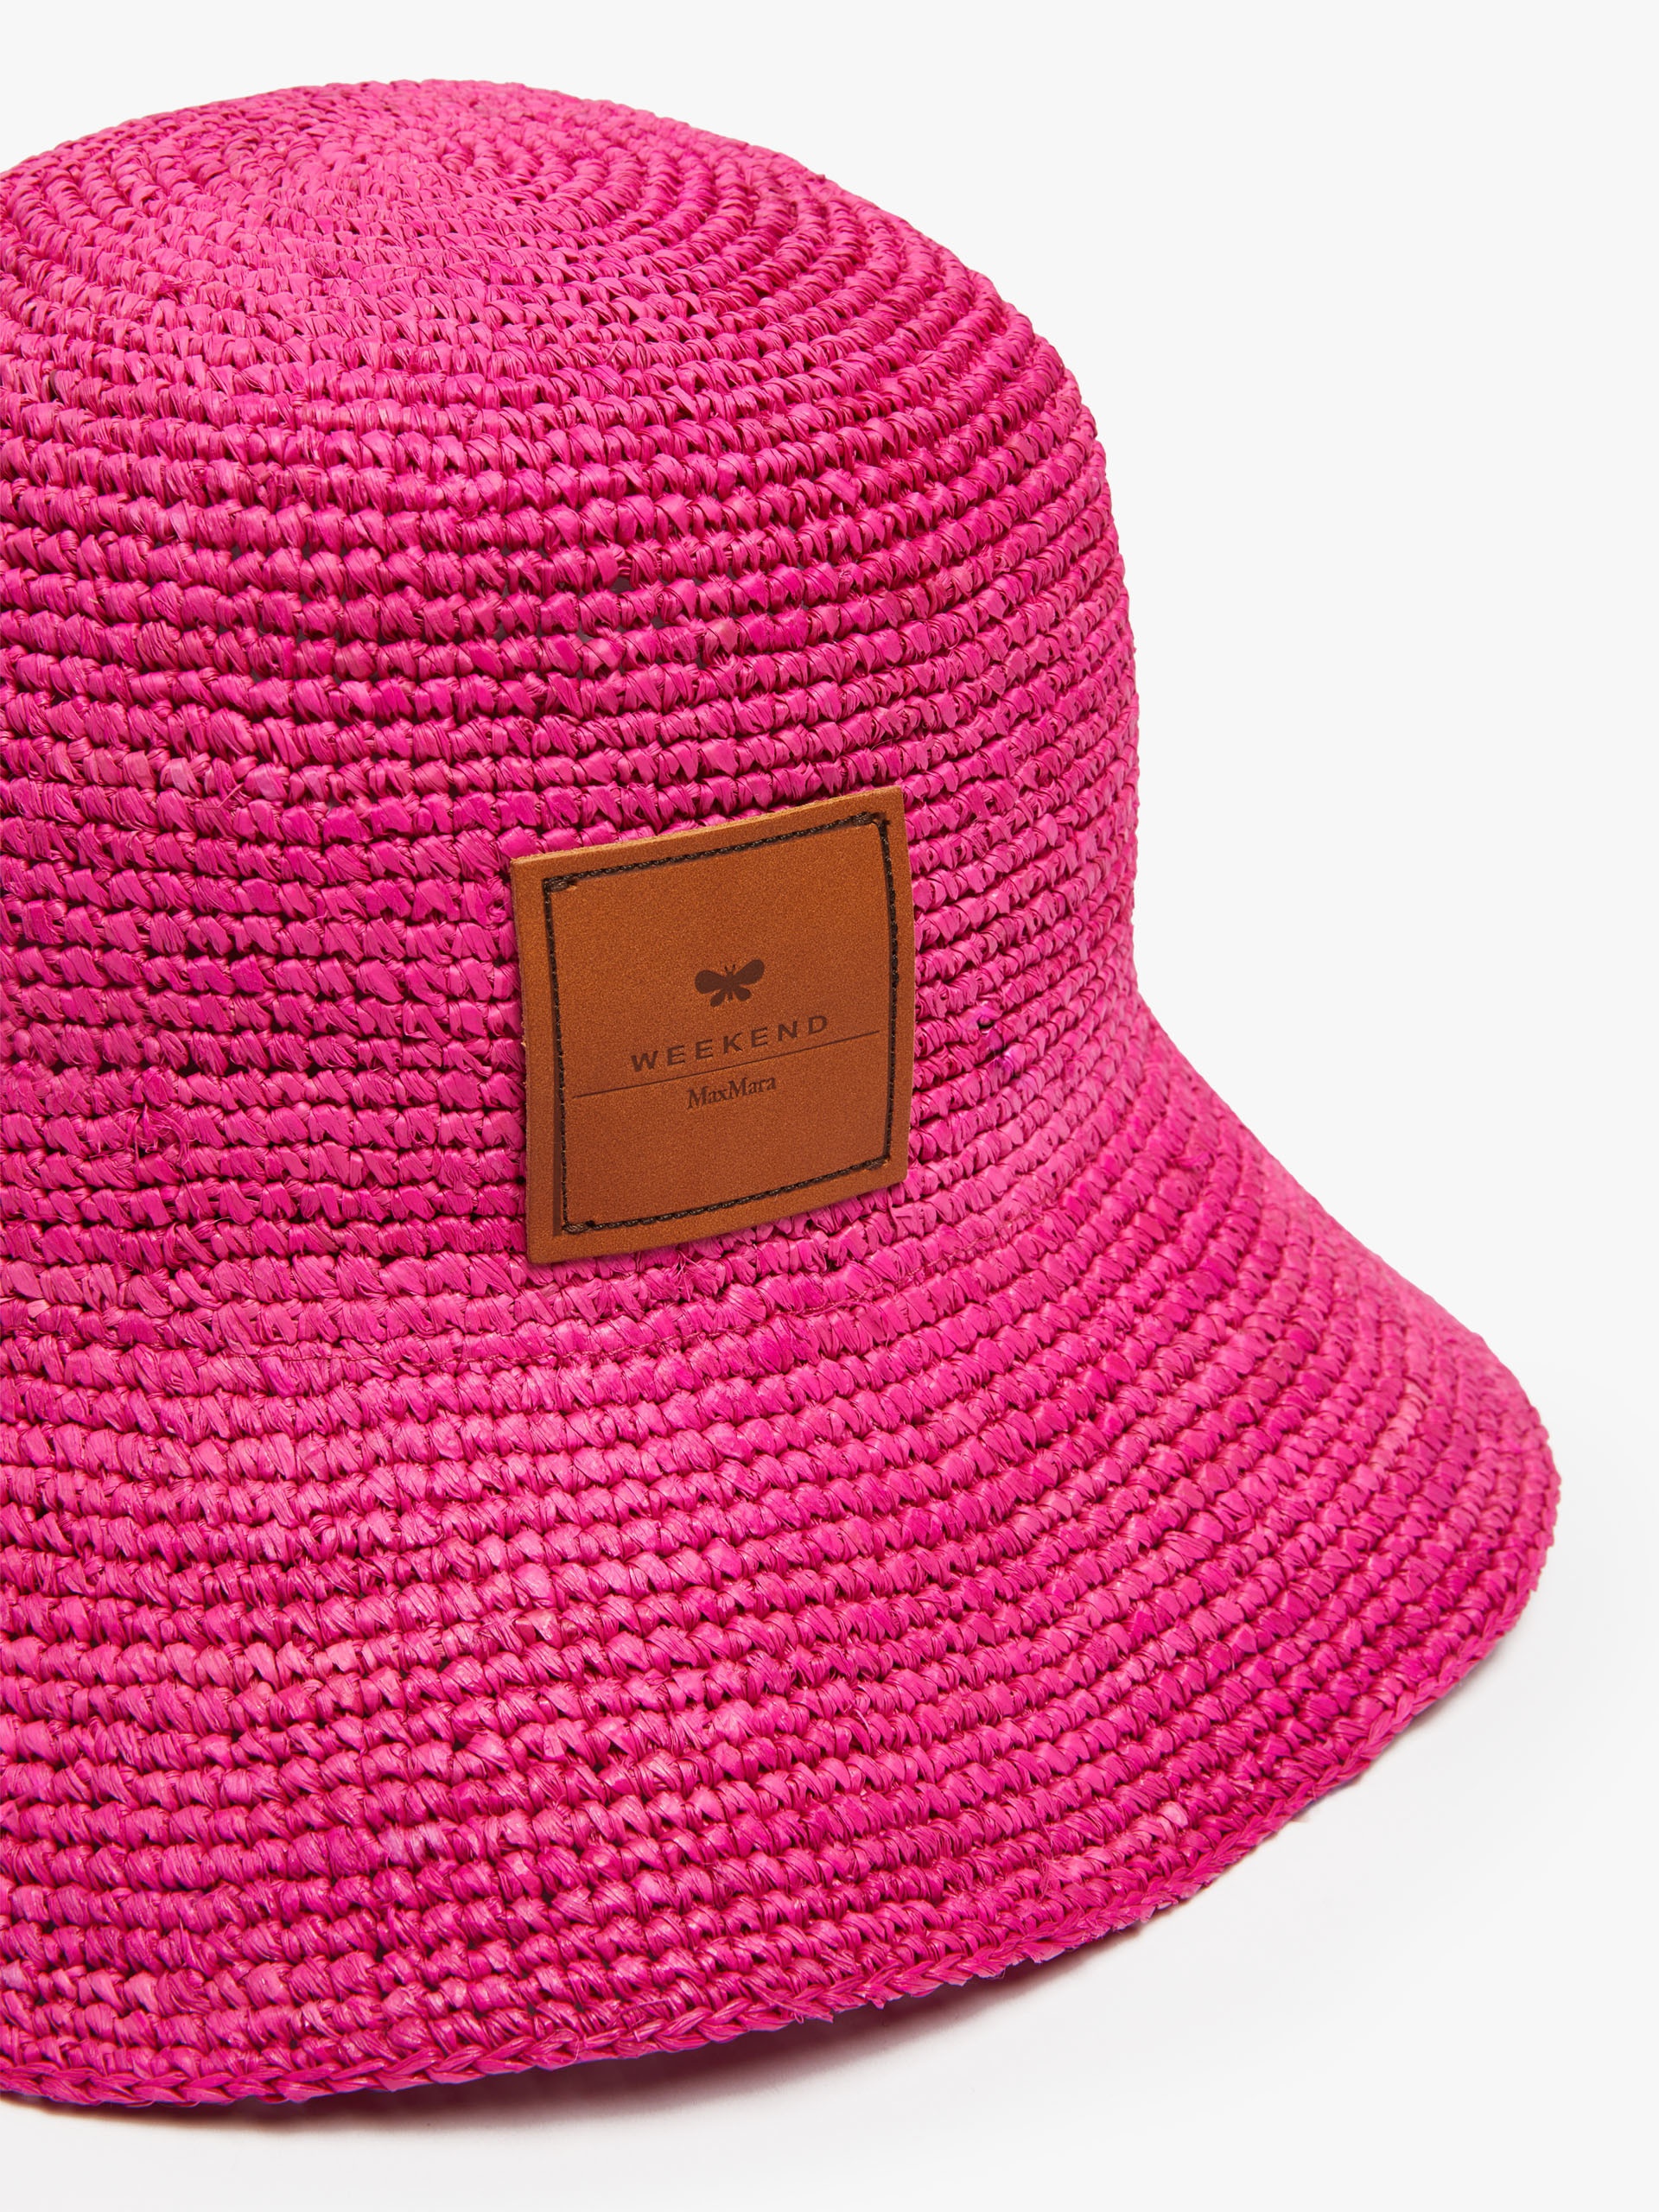 AQUILE Cloche hat with tag - 2